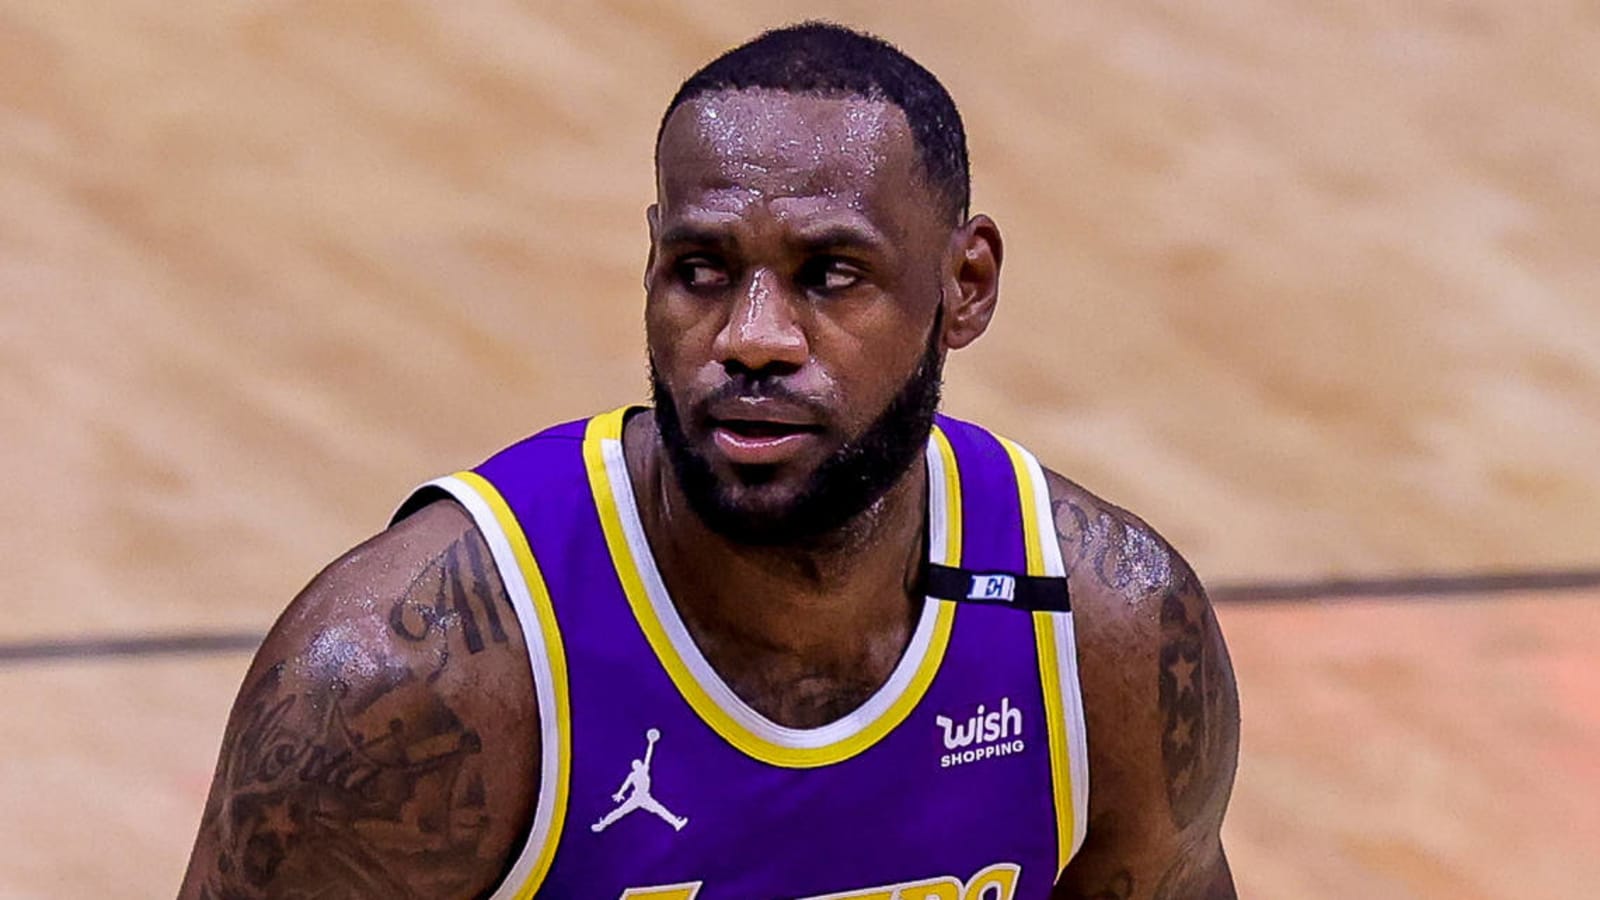 LeBron James dismisses injury concerns about his ankle